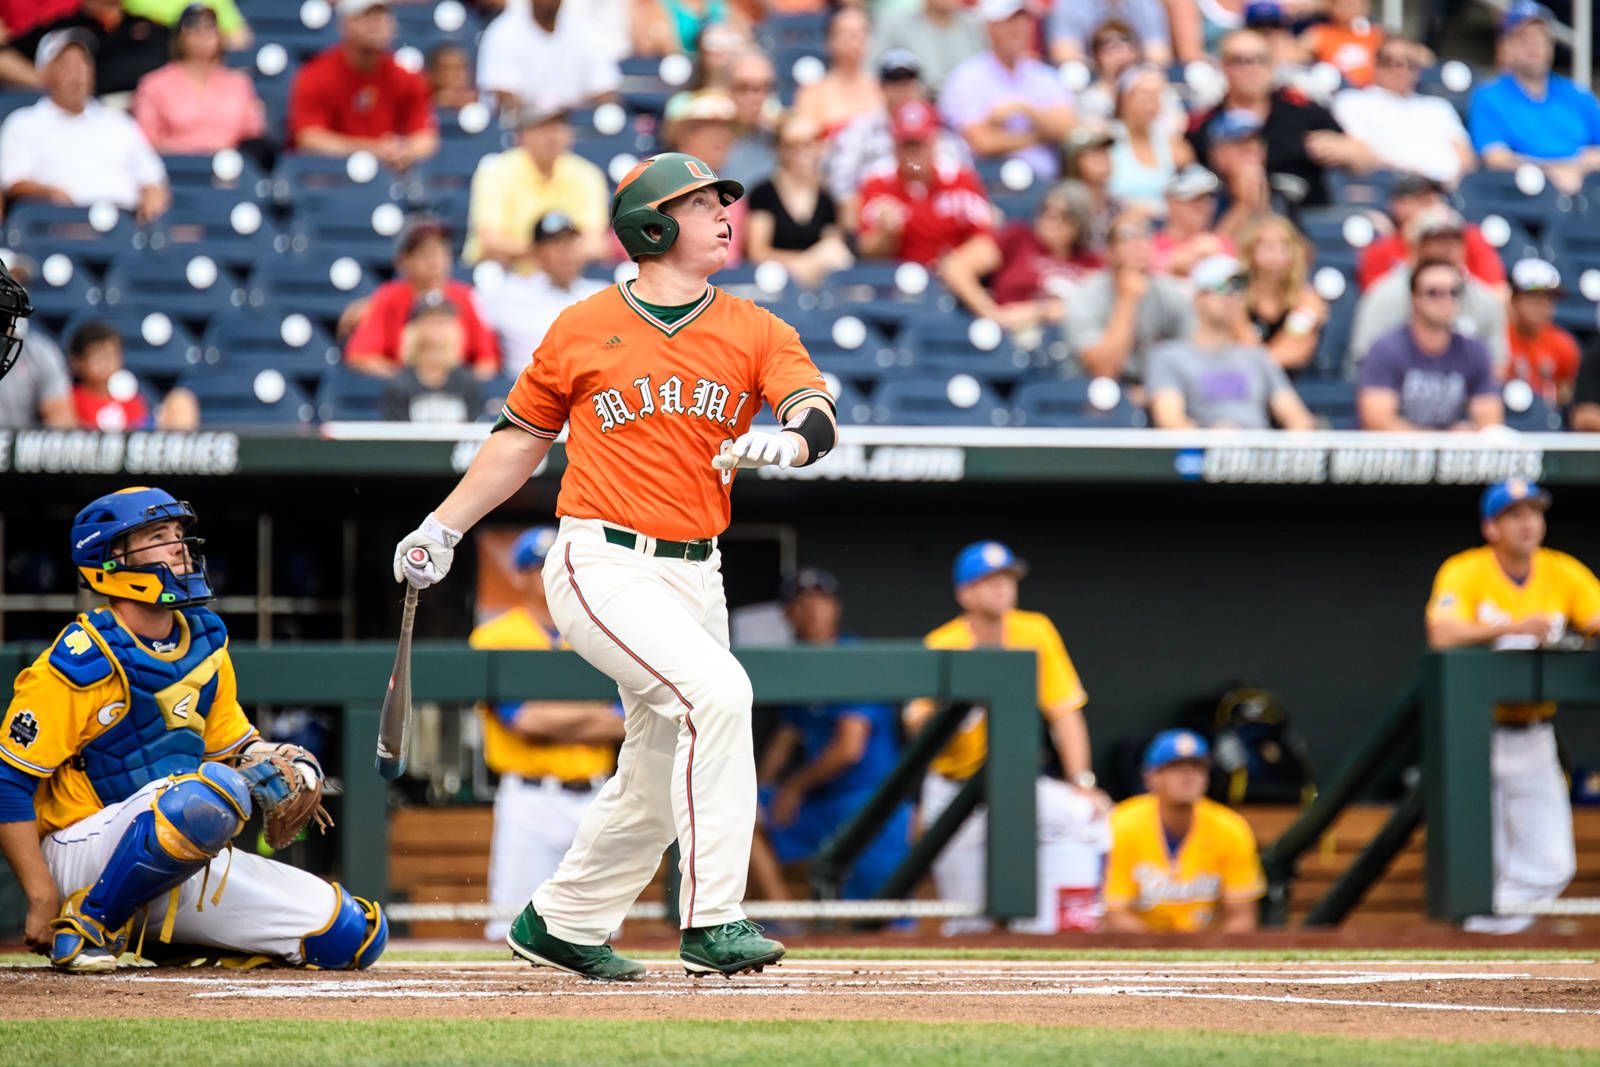 Miami Falls to UCSB, 5-3, in CWS Elimination Game